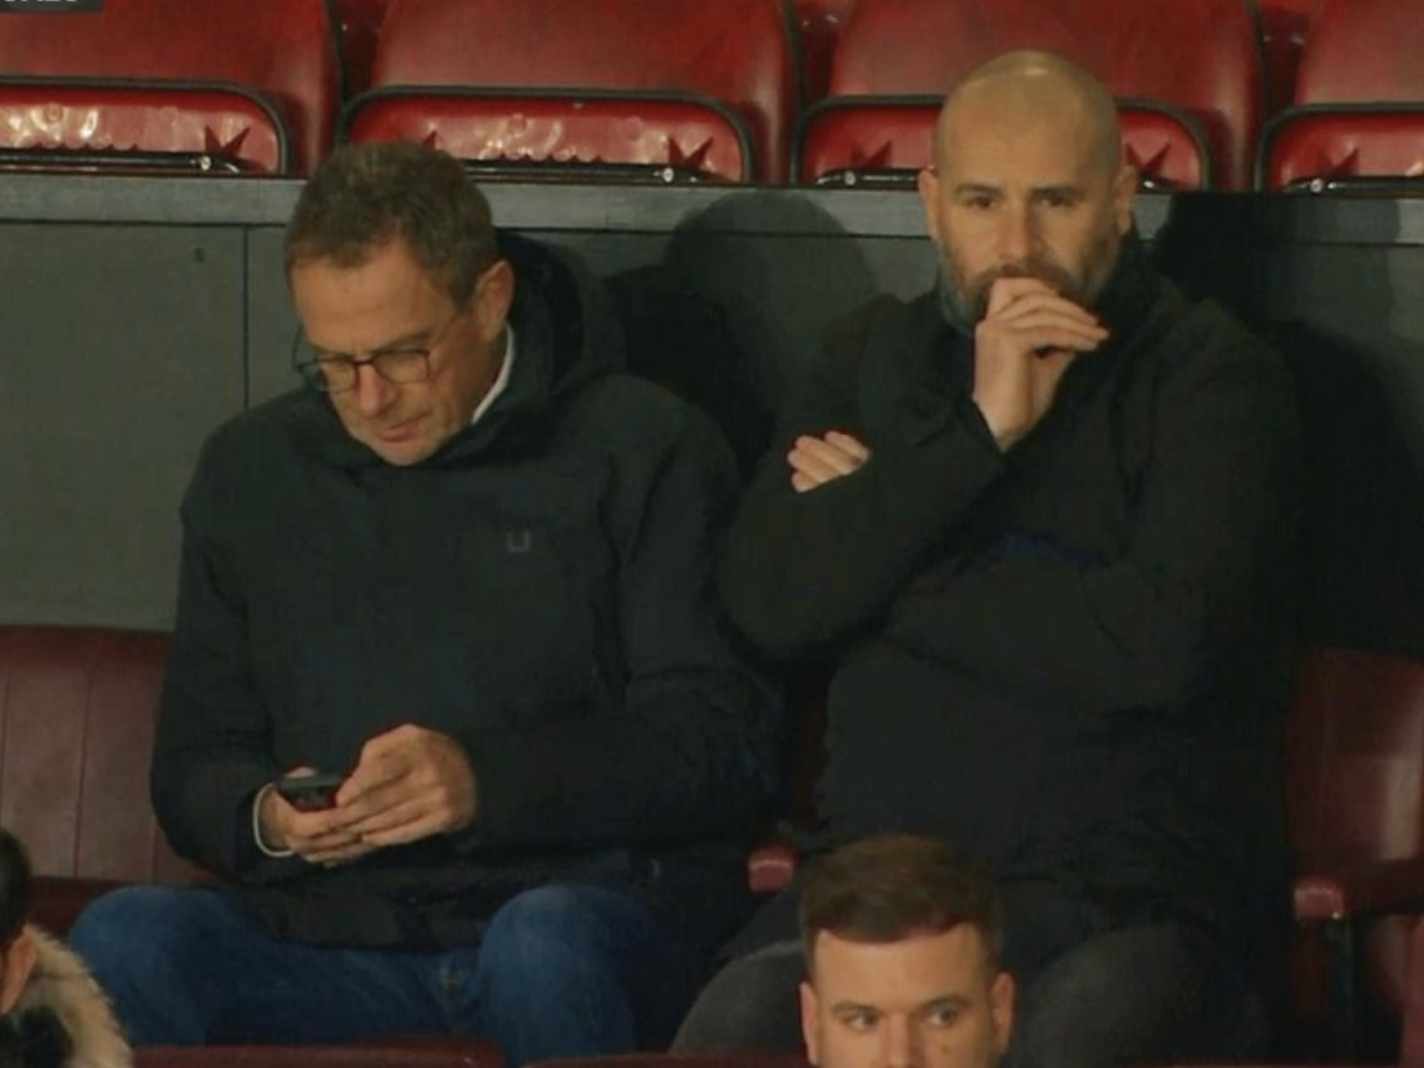 Twitter reacts as Ralf Rangnick watches U18 game with Paul Mitchell, a possible future DoF